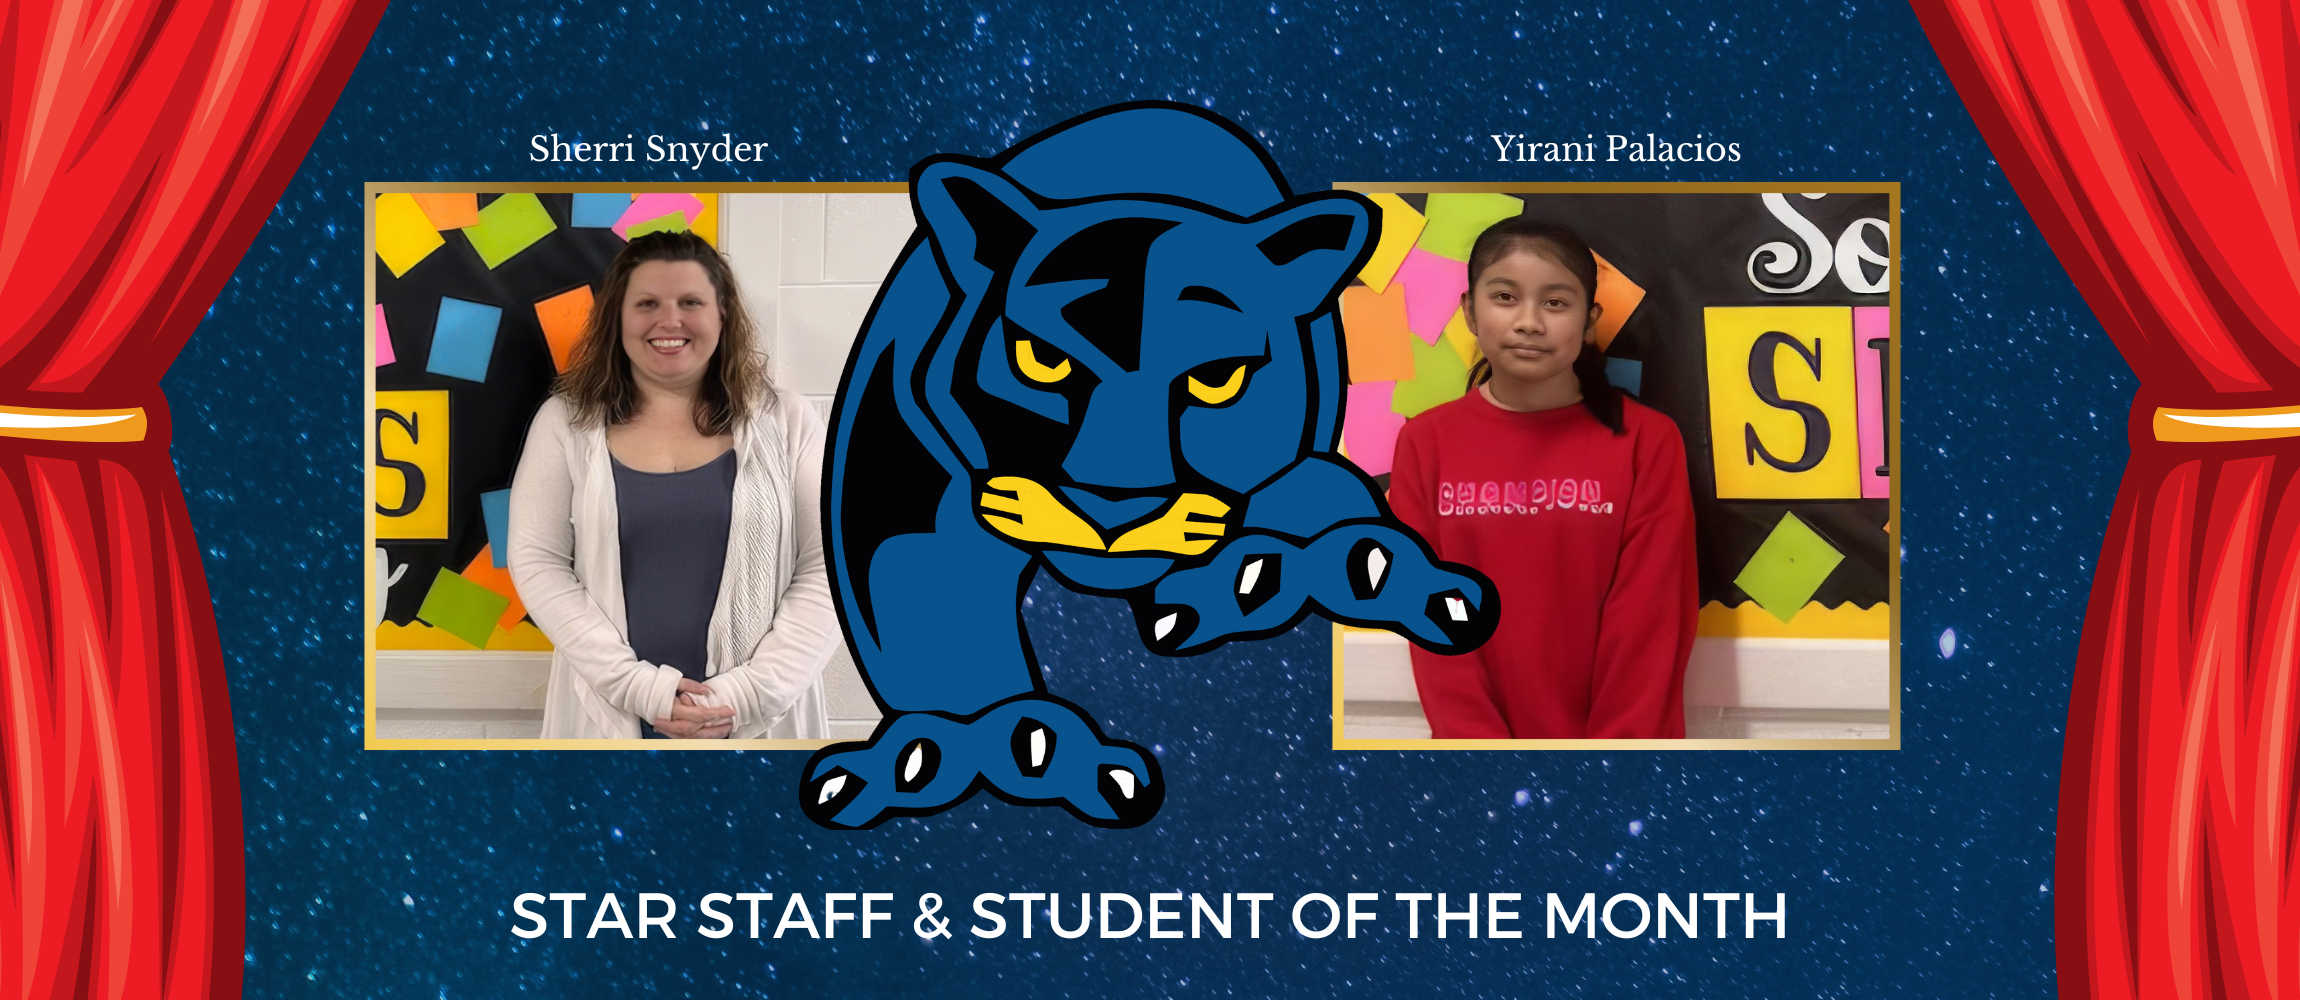 STAR Staff and Student of the month feature banner with portraits and school logo